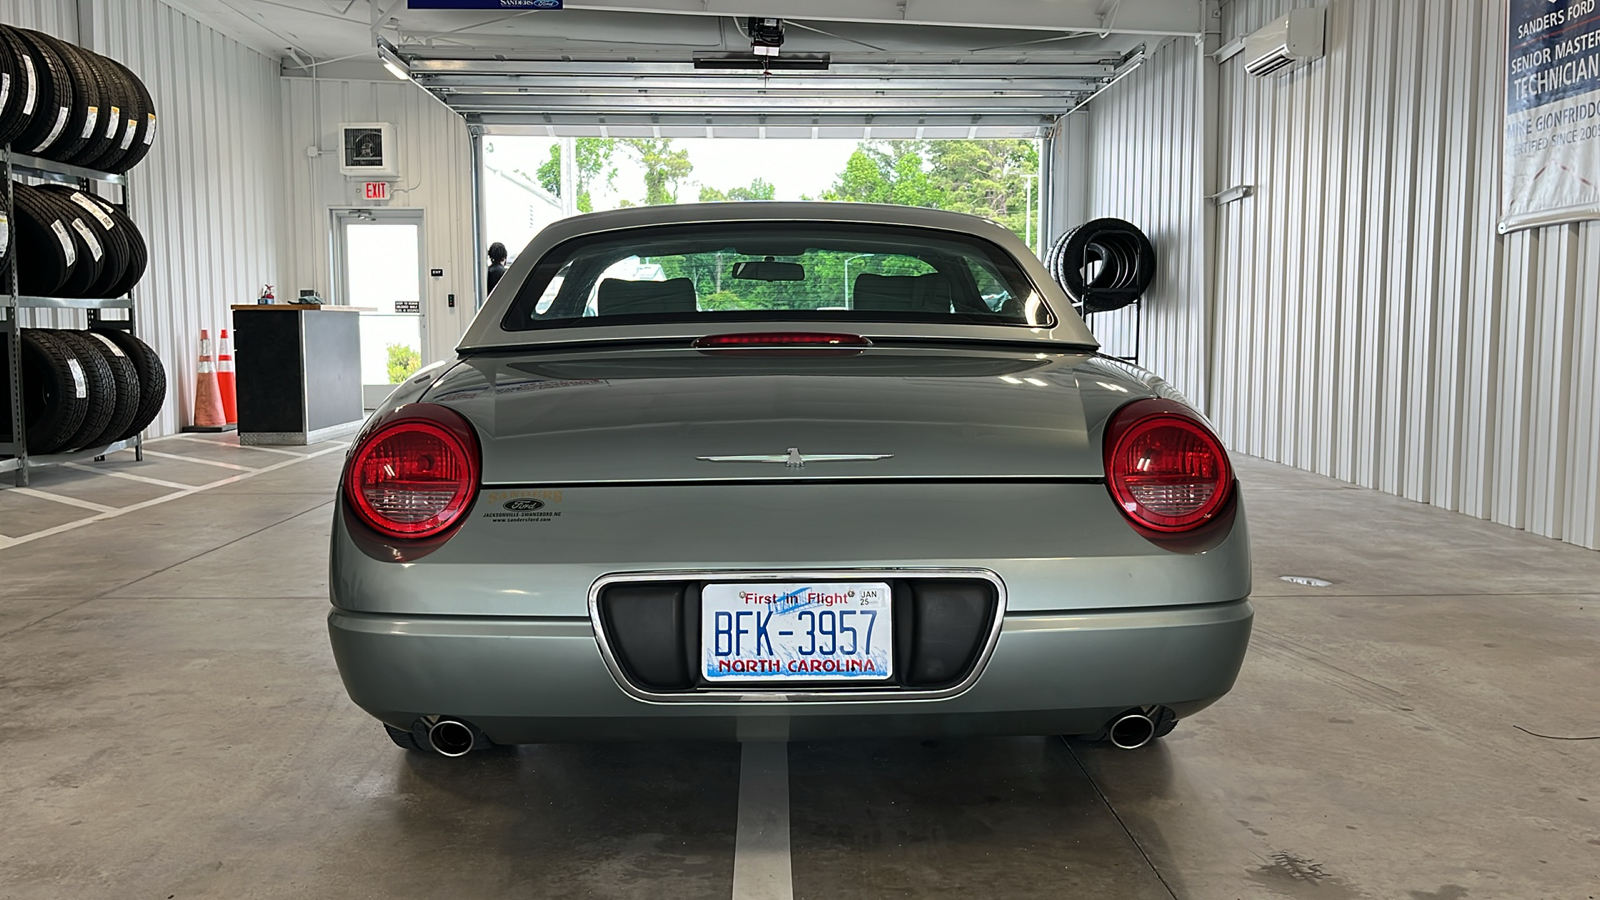 2004 Ford Thunderbird Pacific Coast Roadster 22